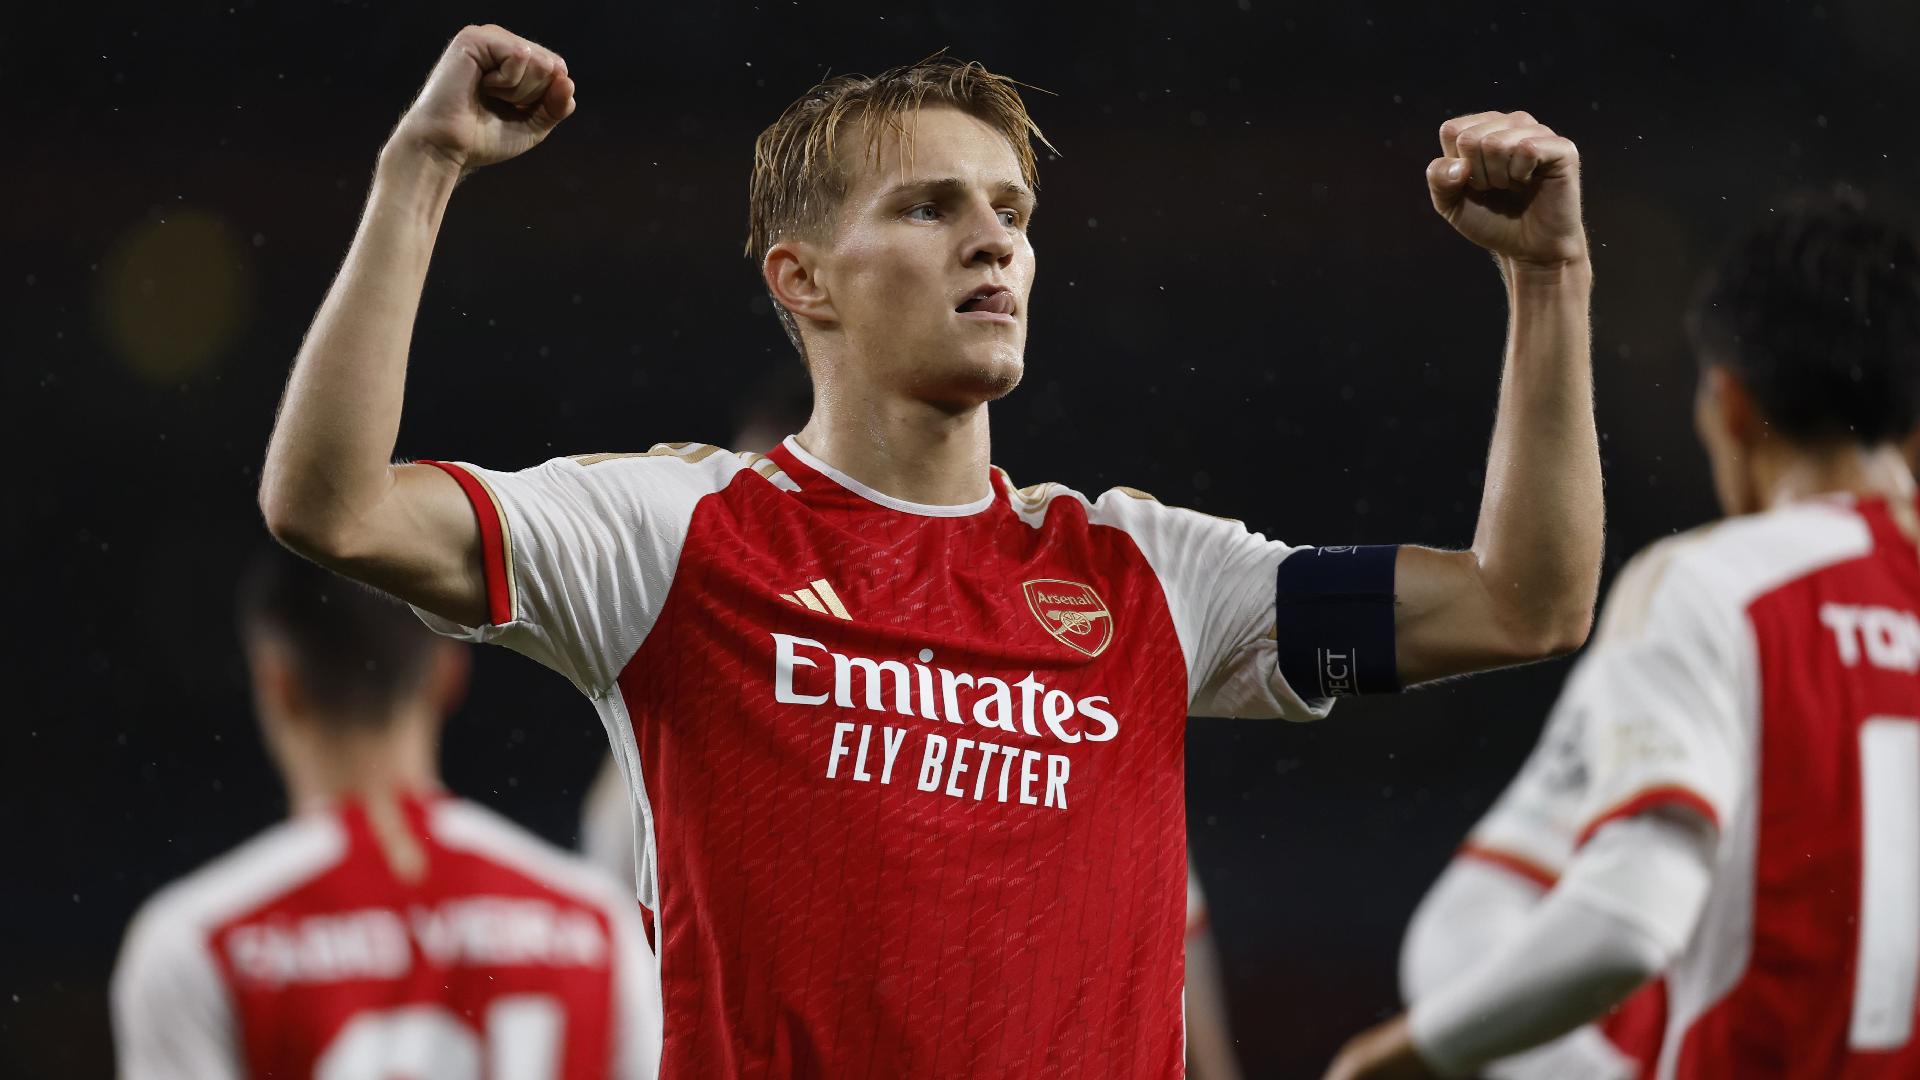 It's a great place – Martin Odegaard feels at home at Arsenal after new  deal | beIN SPORTS